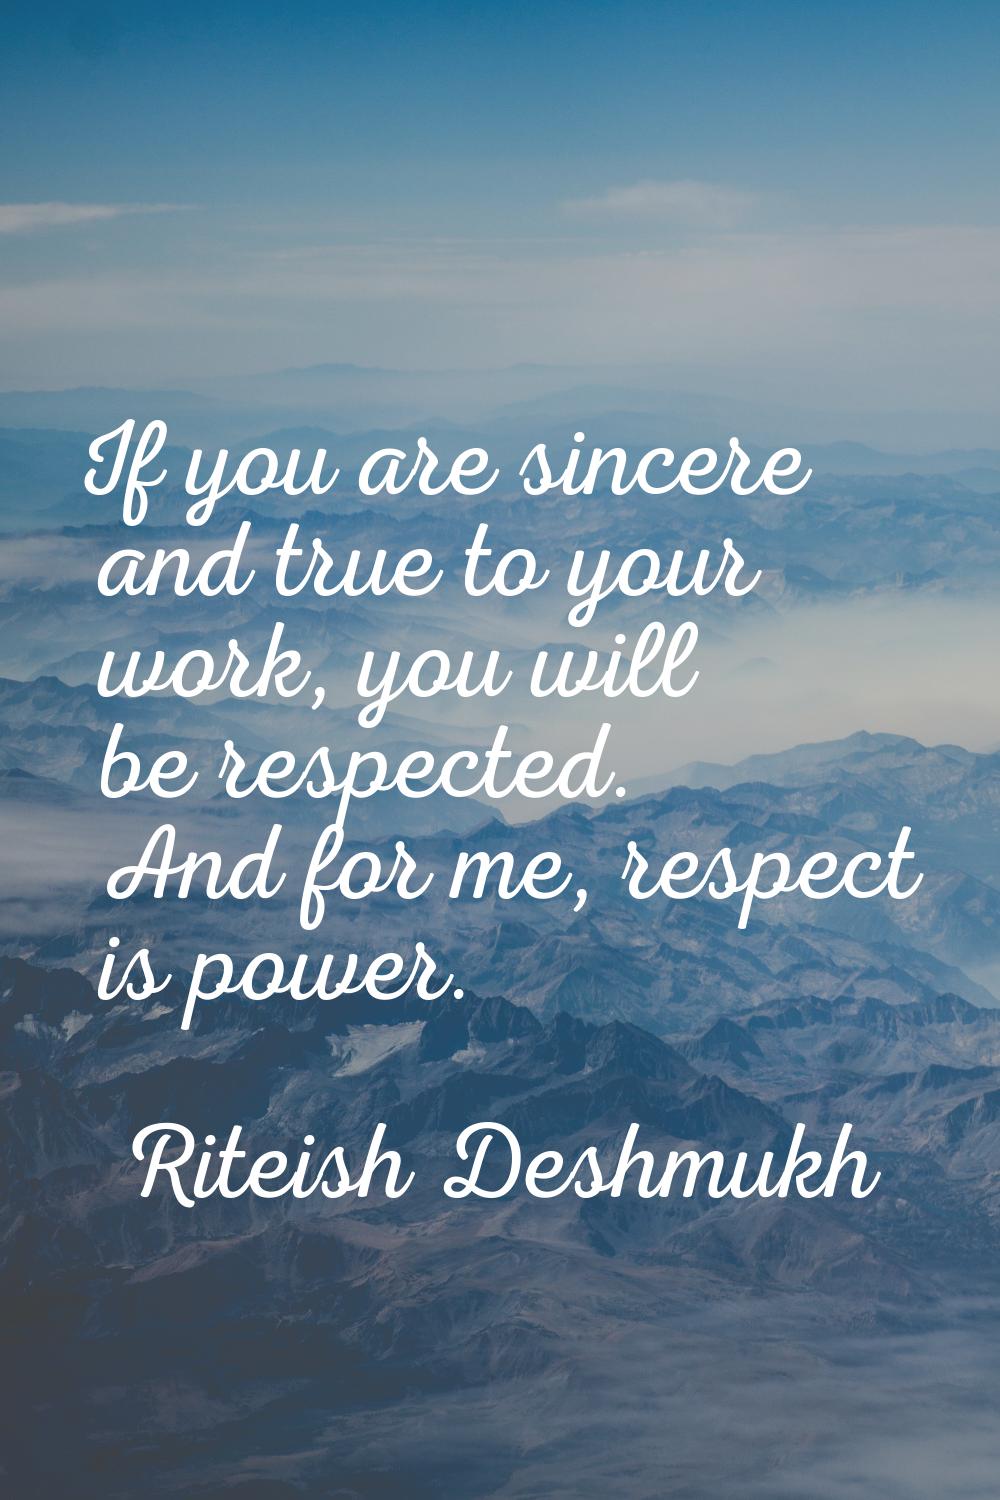 If you are sincere and true to your work, you will be respected. And for me, respect is power.